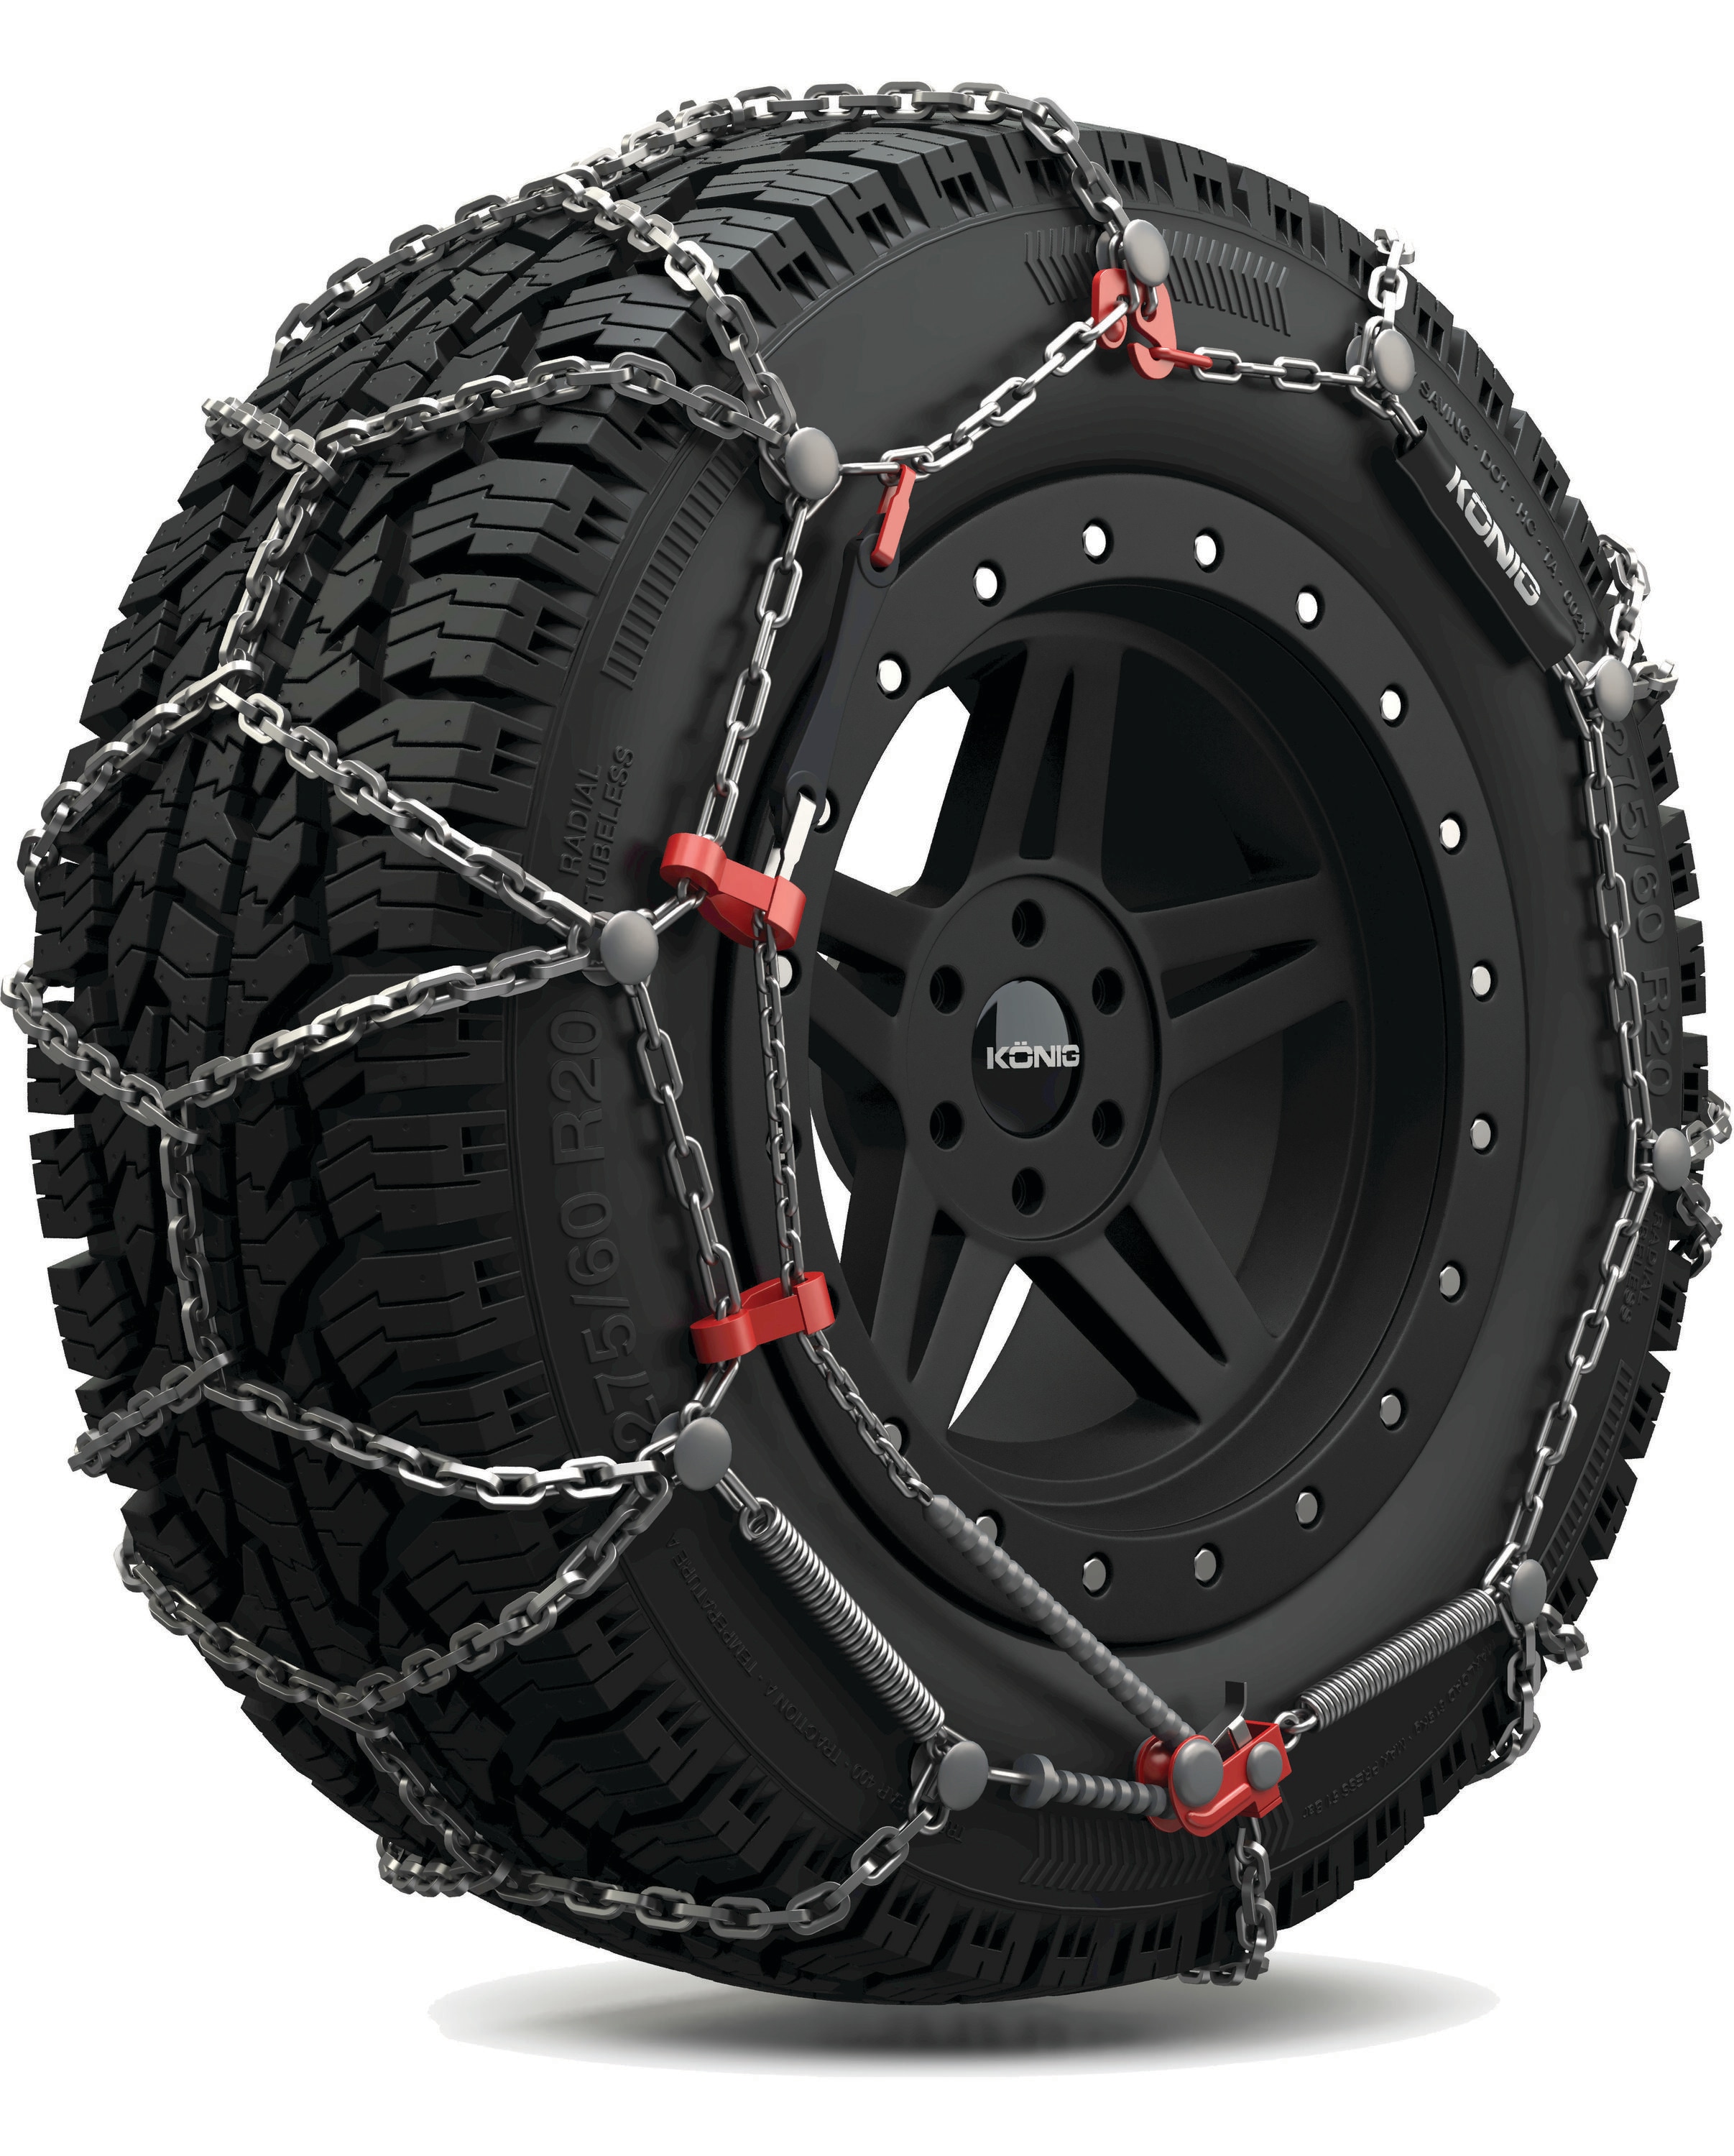 Tire chains Exterior Car Accessories at